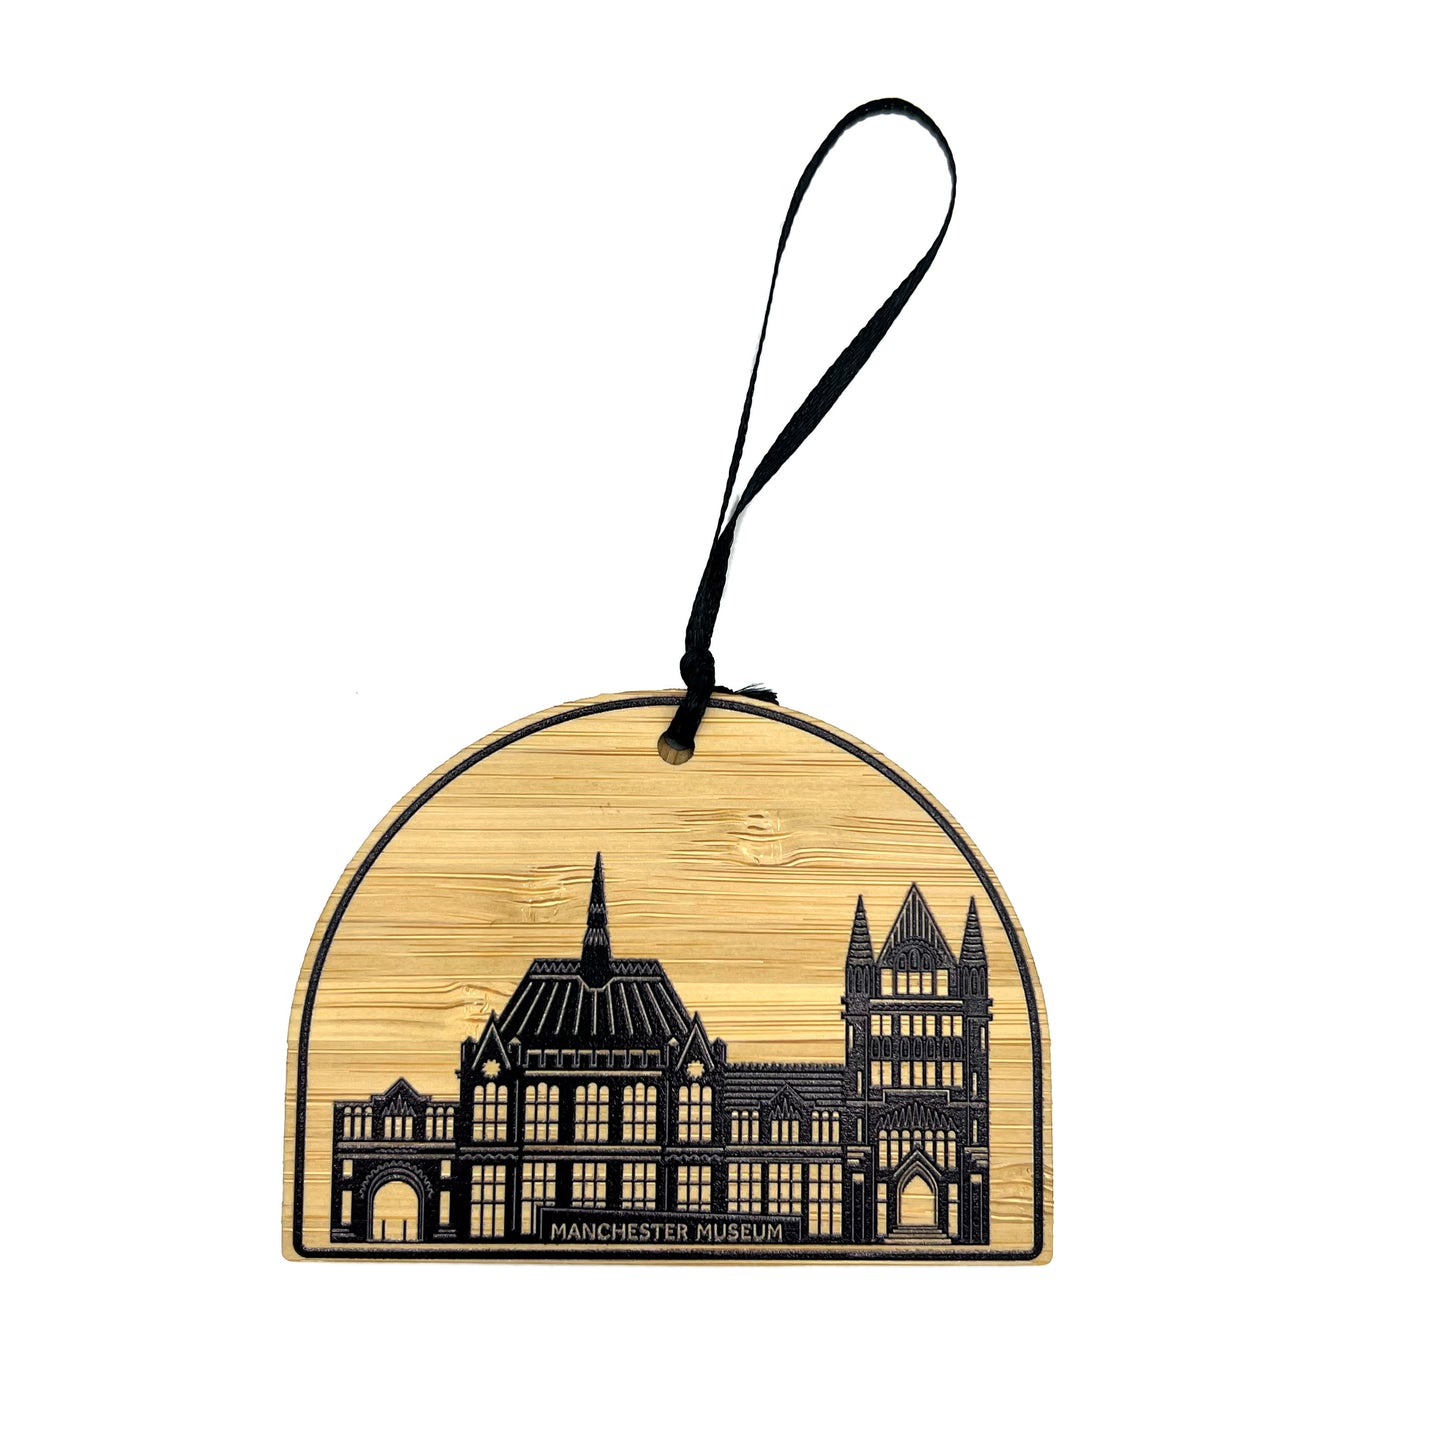 Semi circle bamboo decoration with a drawing of Manchester Museum. Black ribbon. White background.